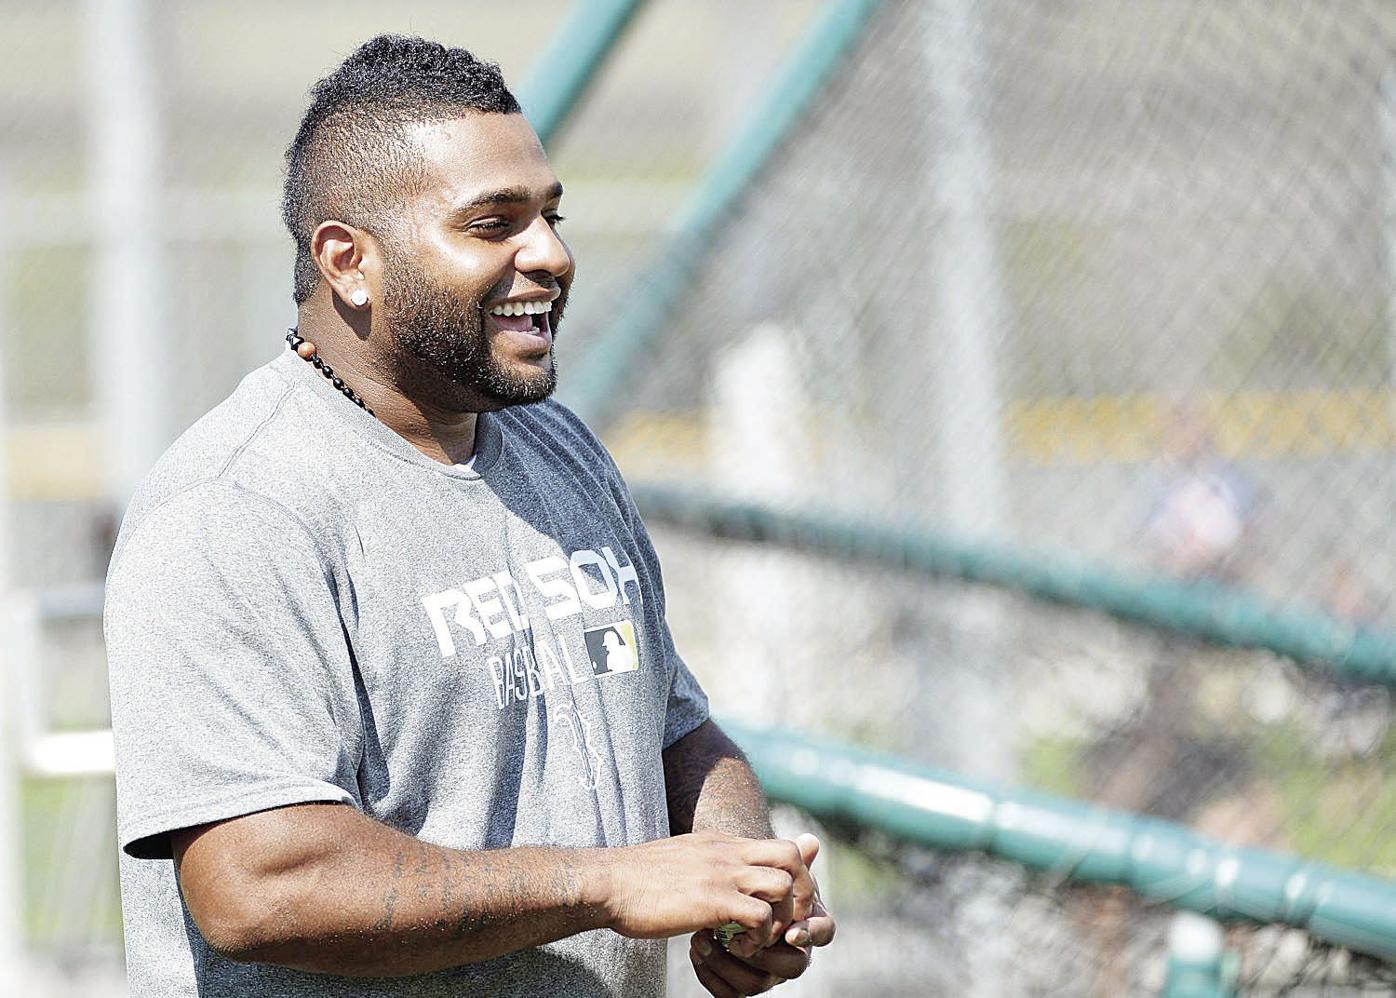 Pablo Sandoval wants 'new challenge' with Red Sox